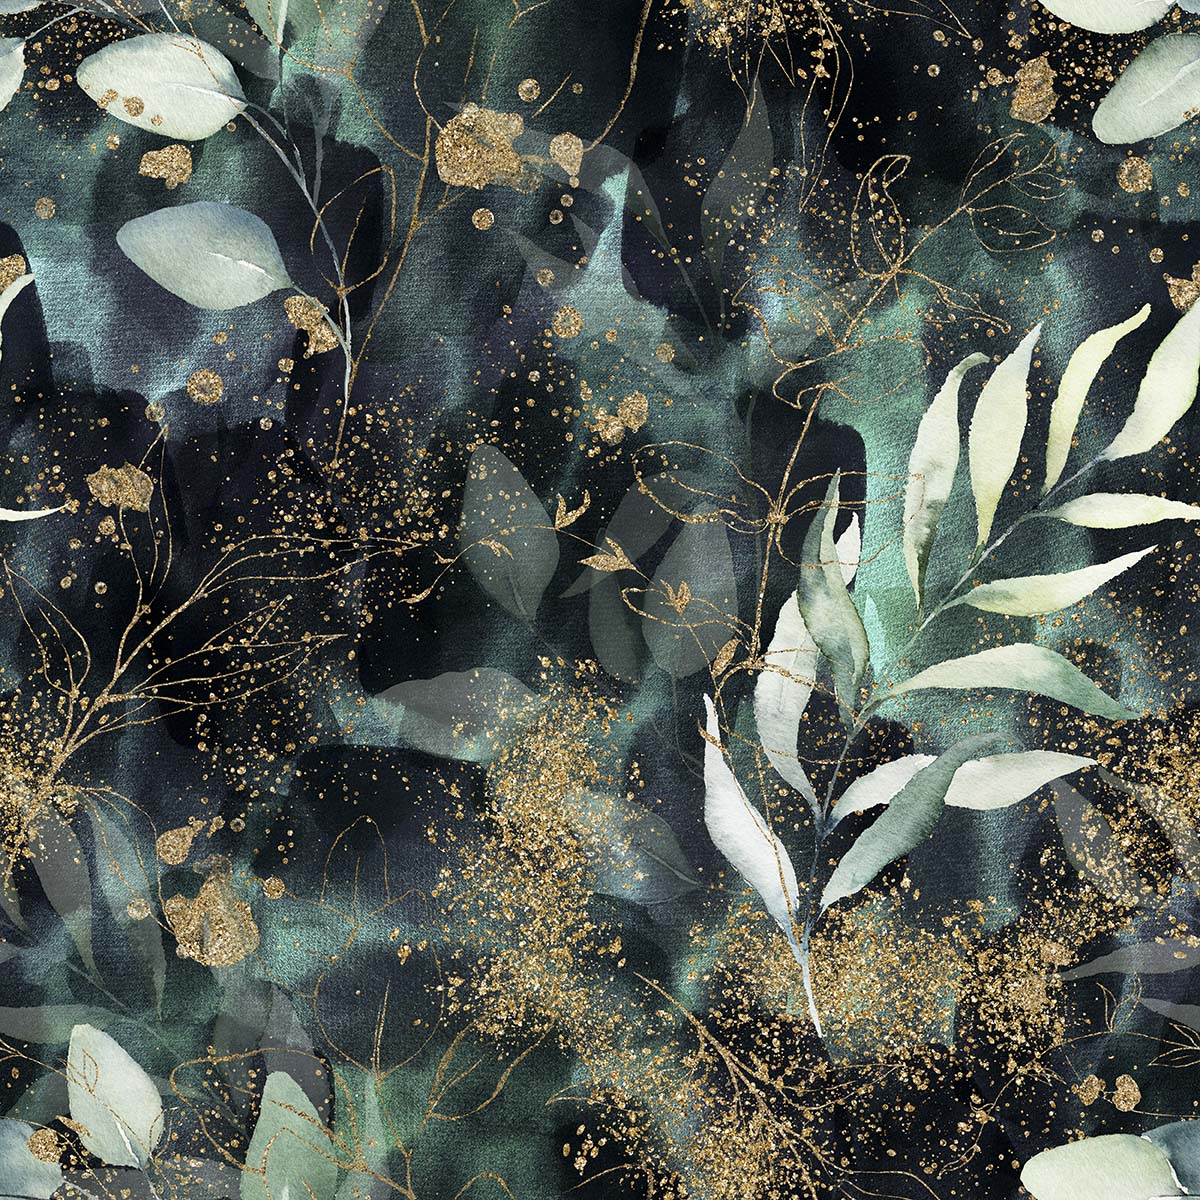 A pattern of leaves and gold splatters